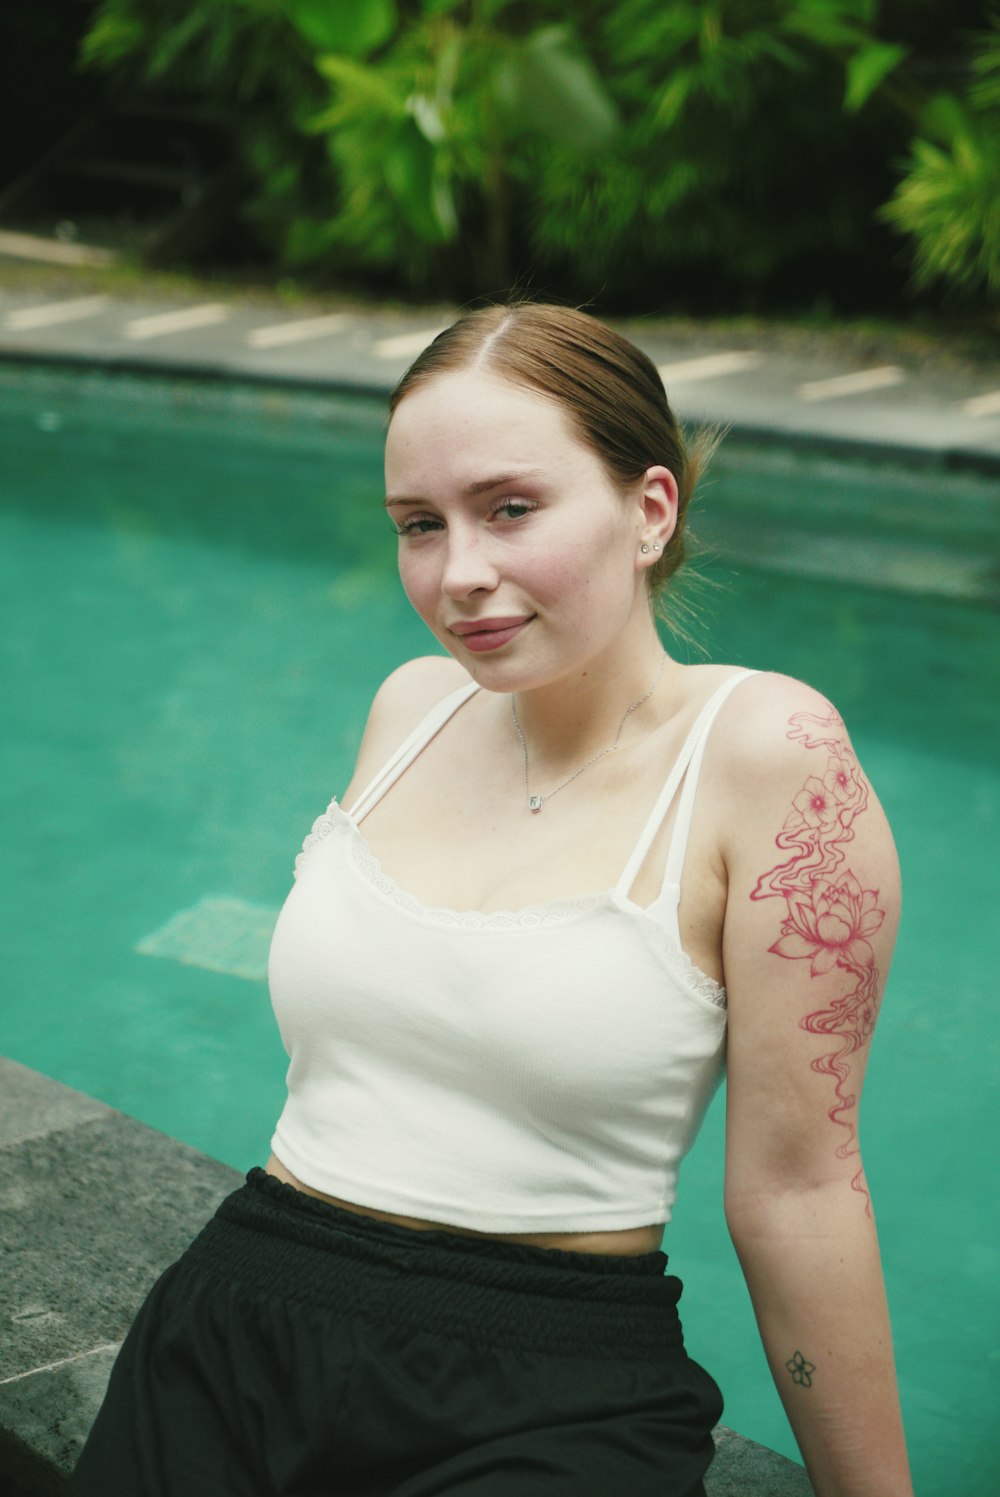 a woman with a tattoo on her arm next to a pool